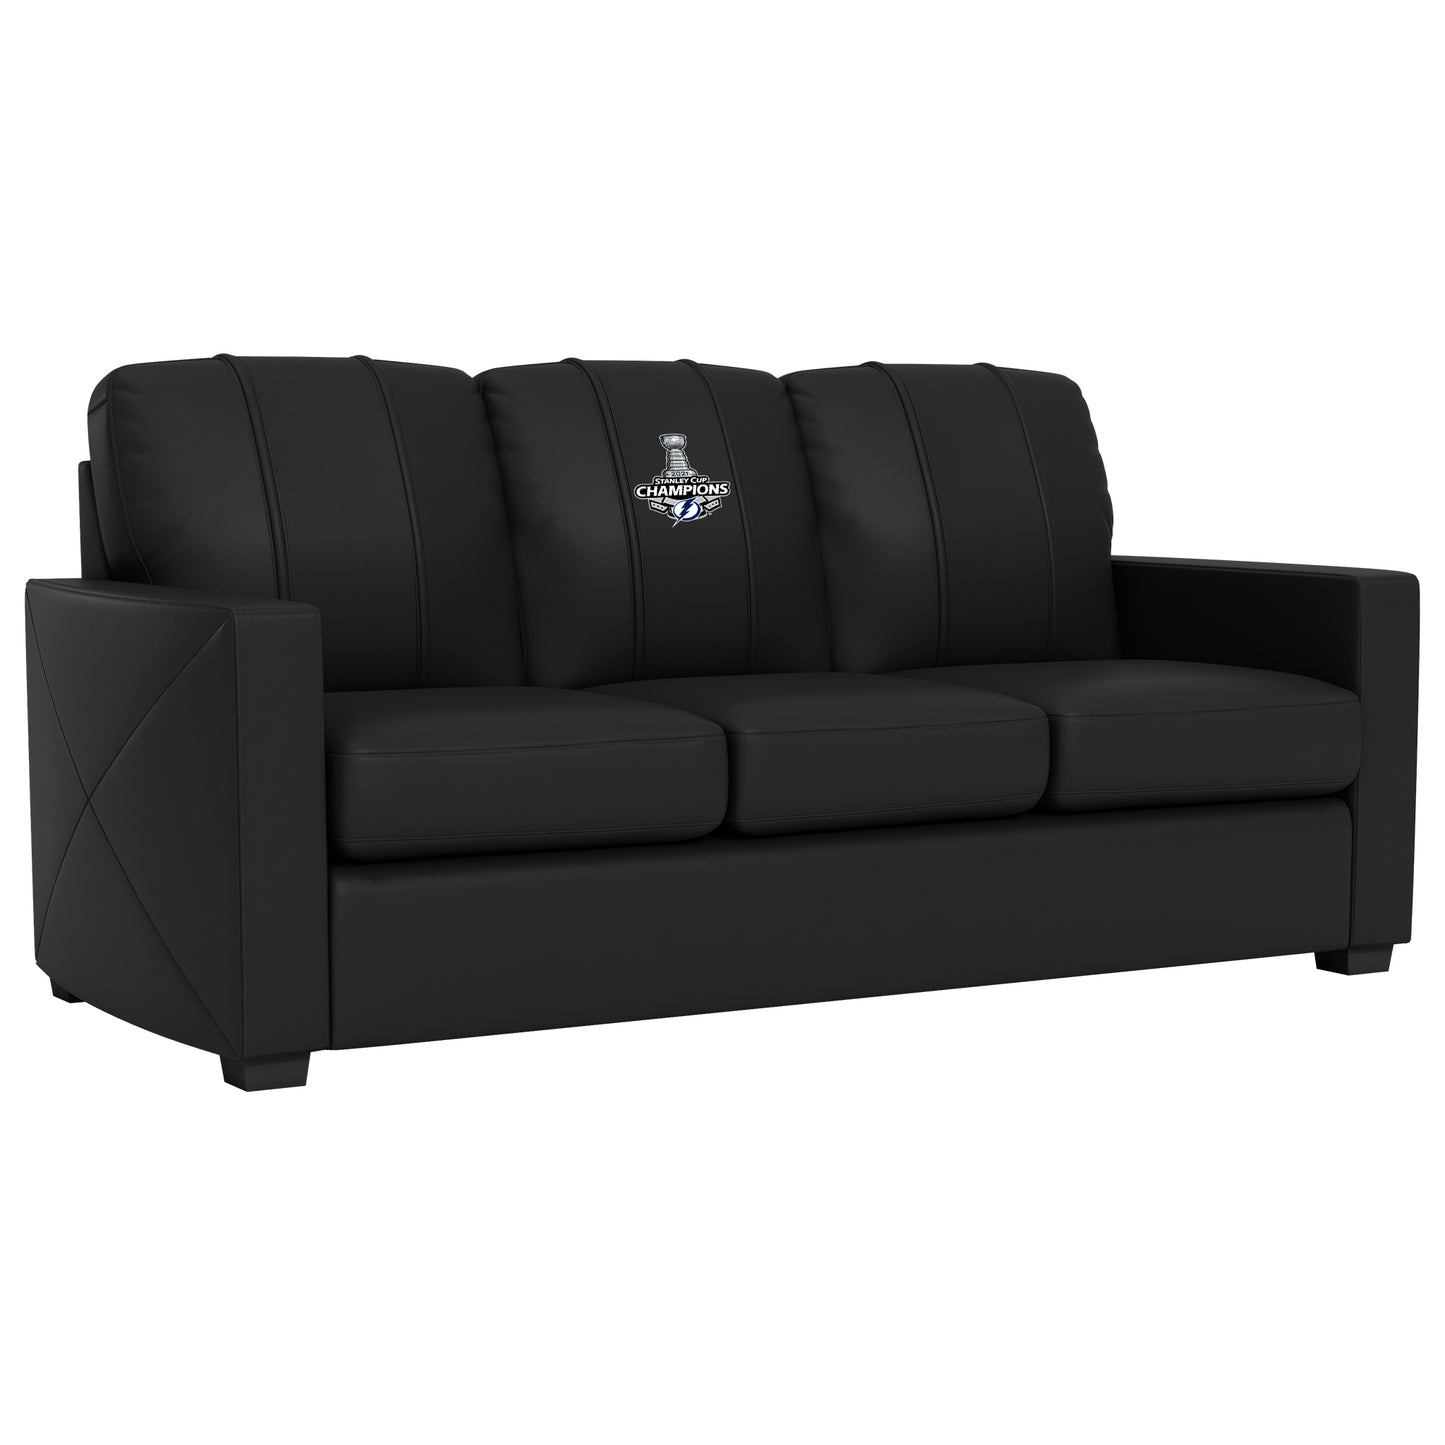 Silver Sofa with Tampa Bay Lightning 2021 Stanley Cup Champions Logo